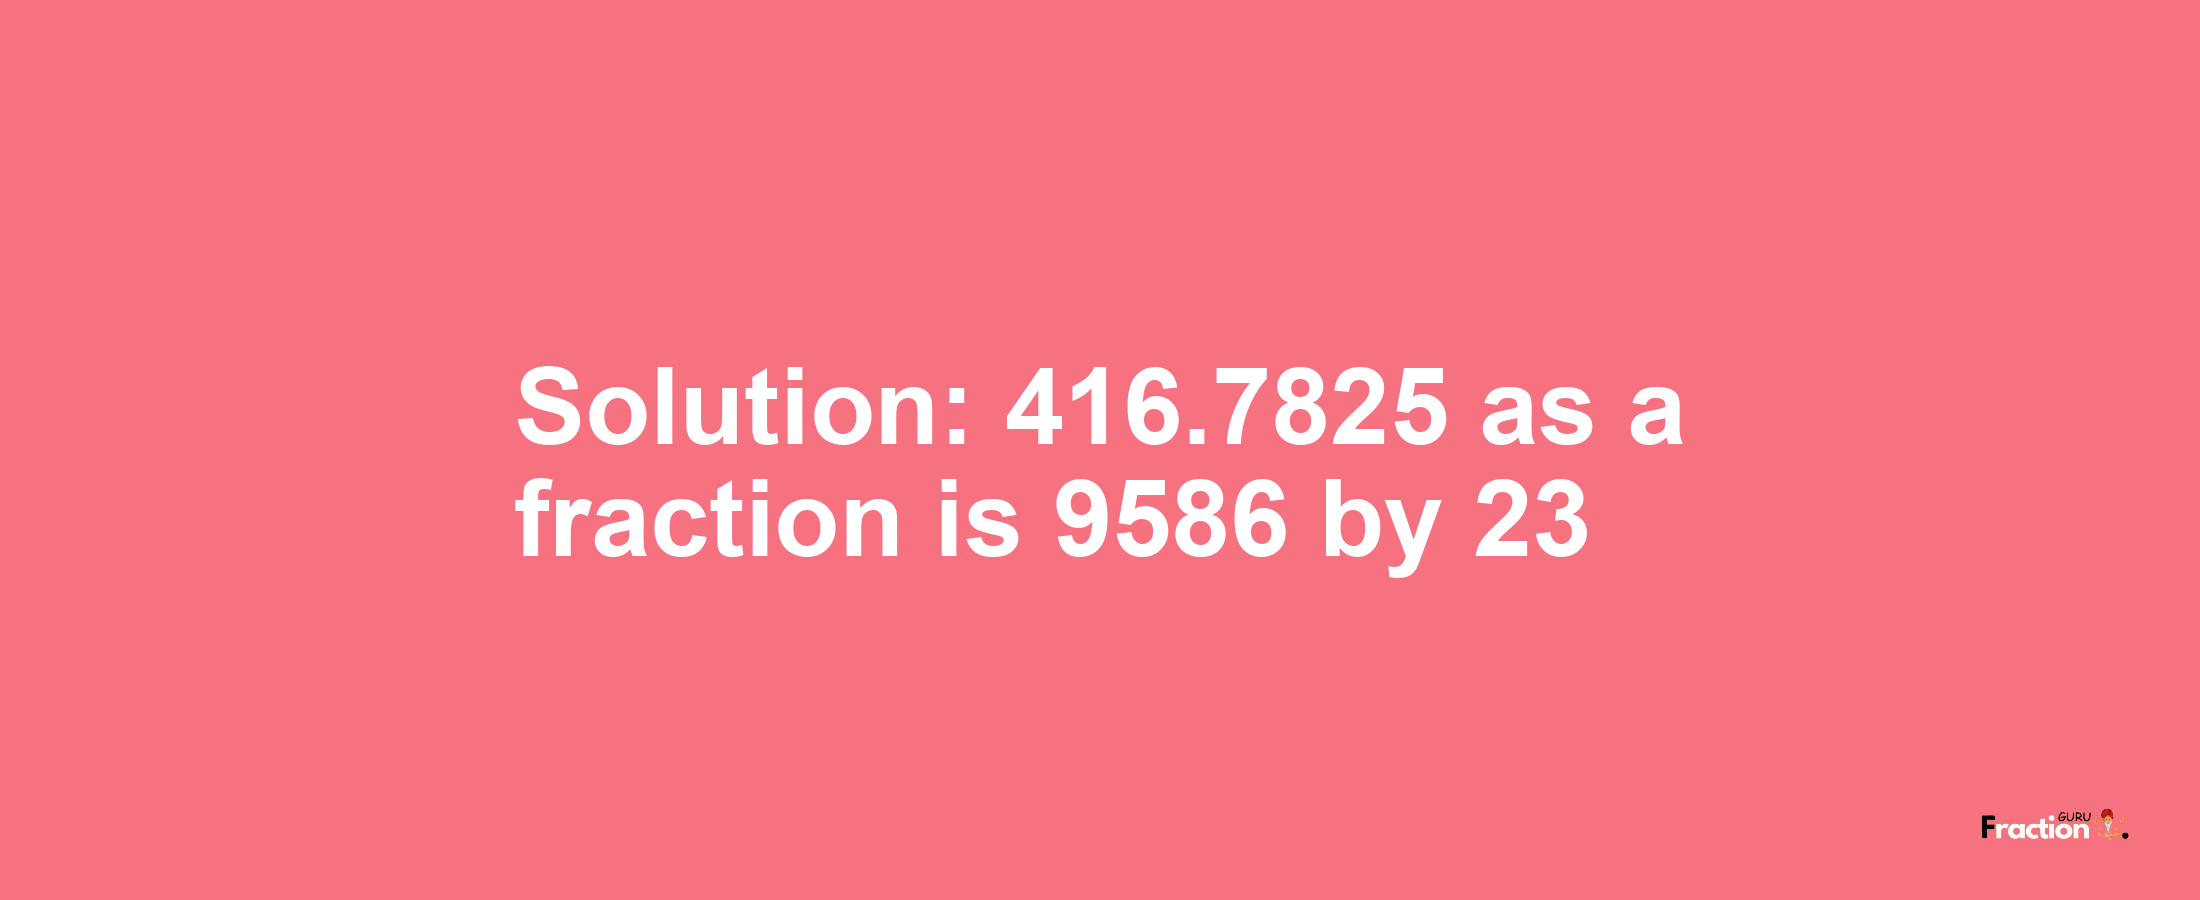 Solution:416.7825 as a fraction is 9586/23